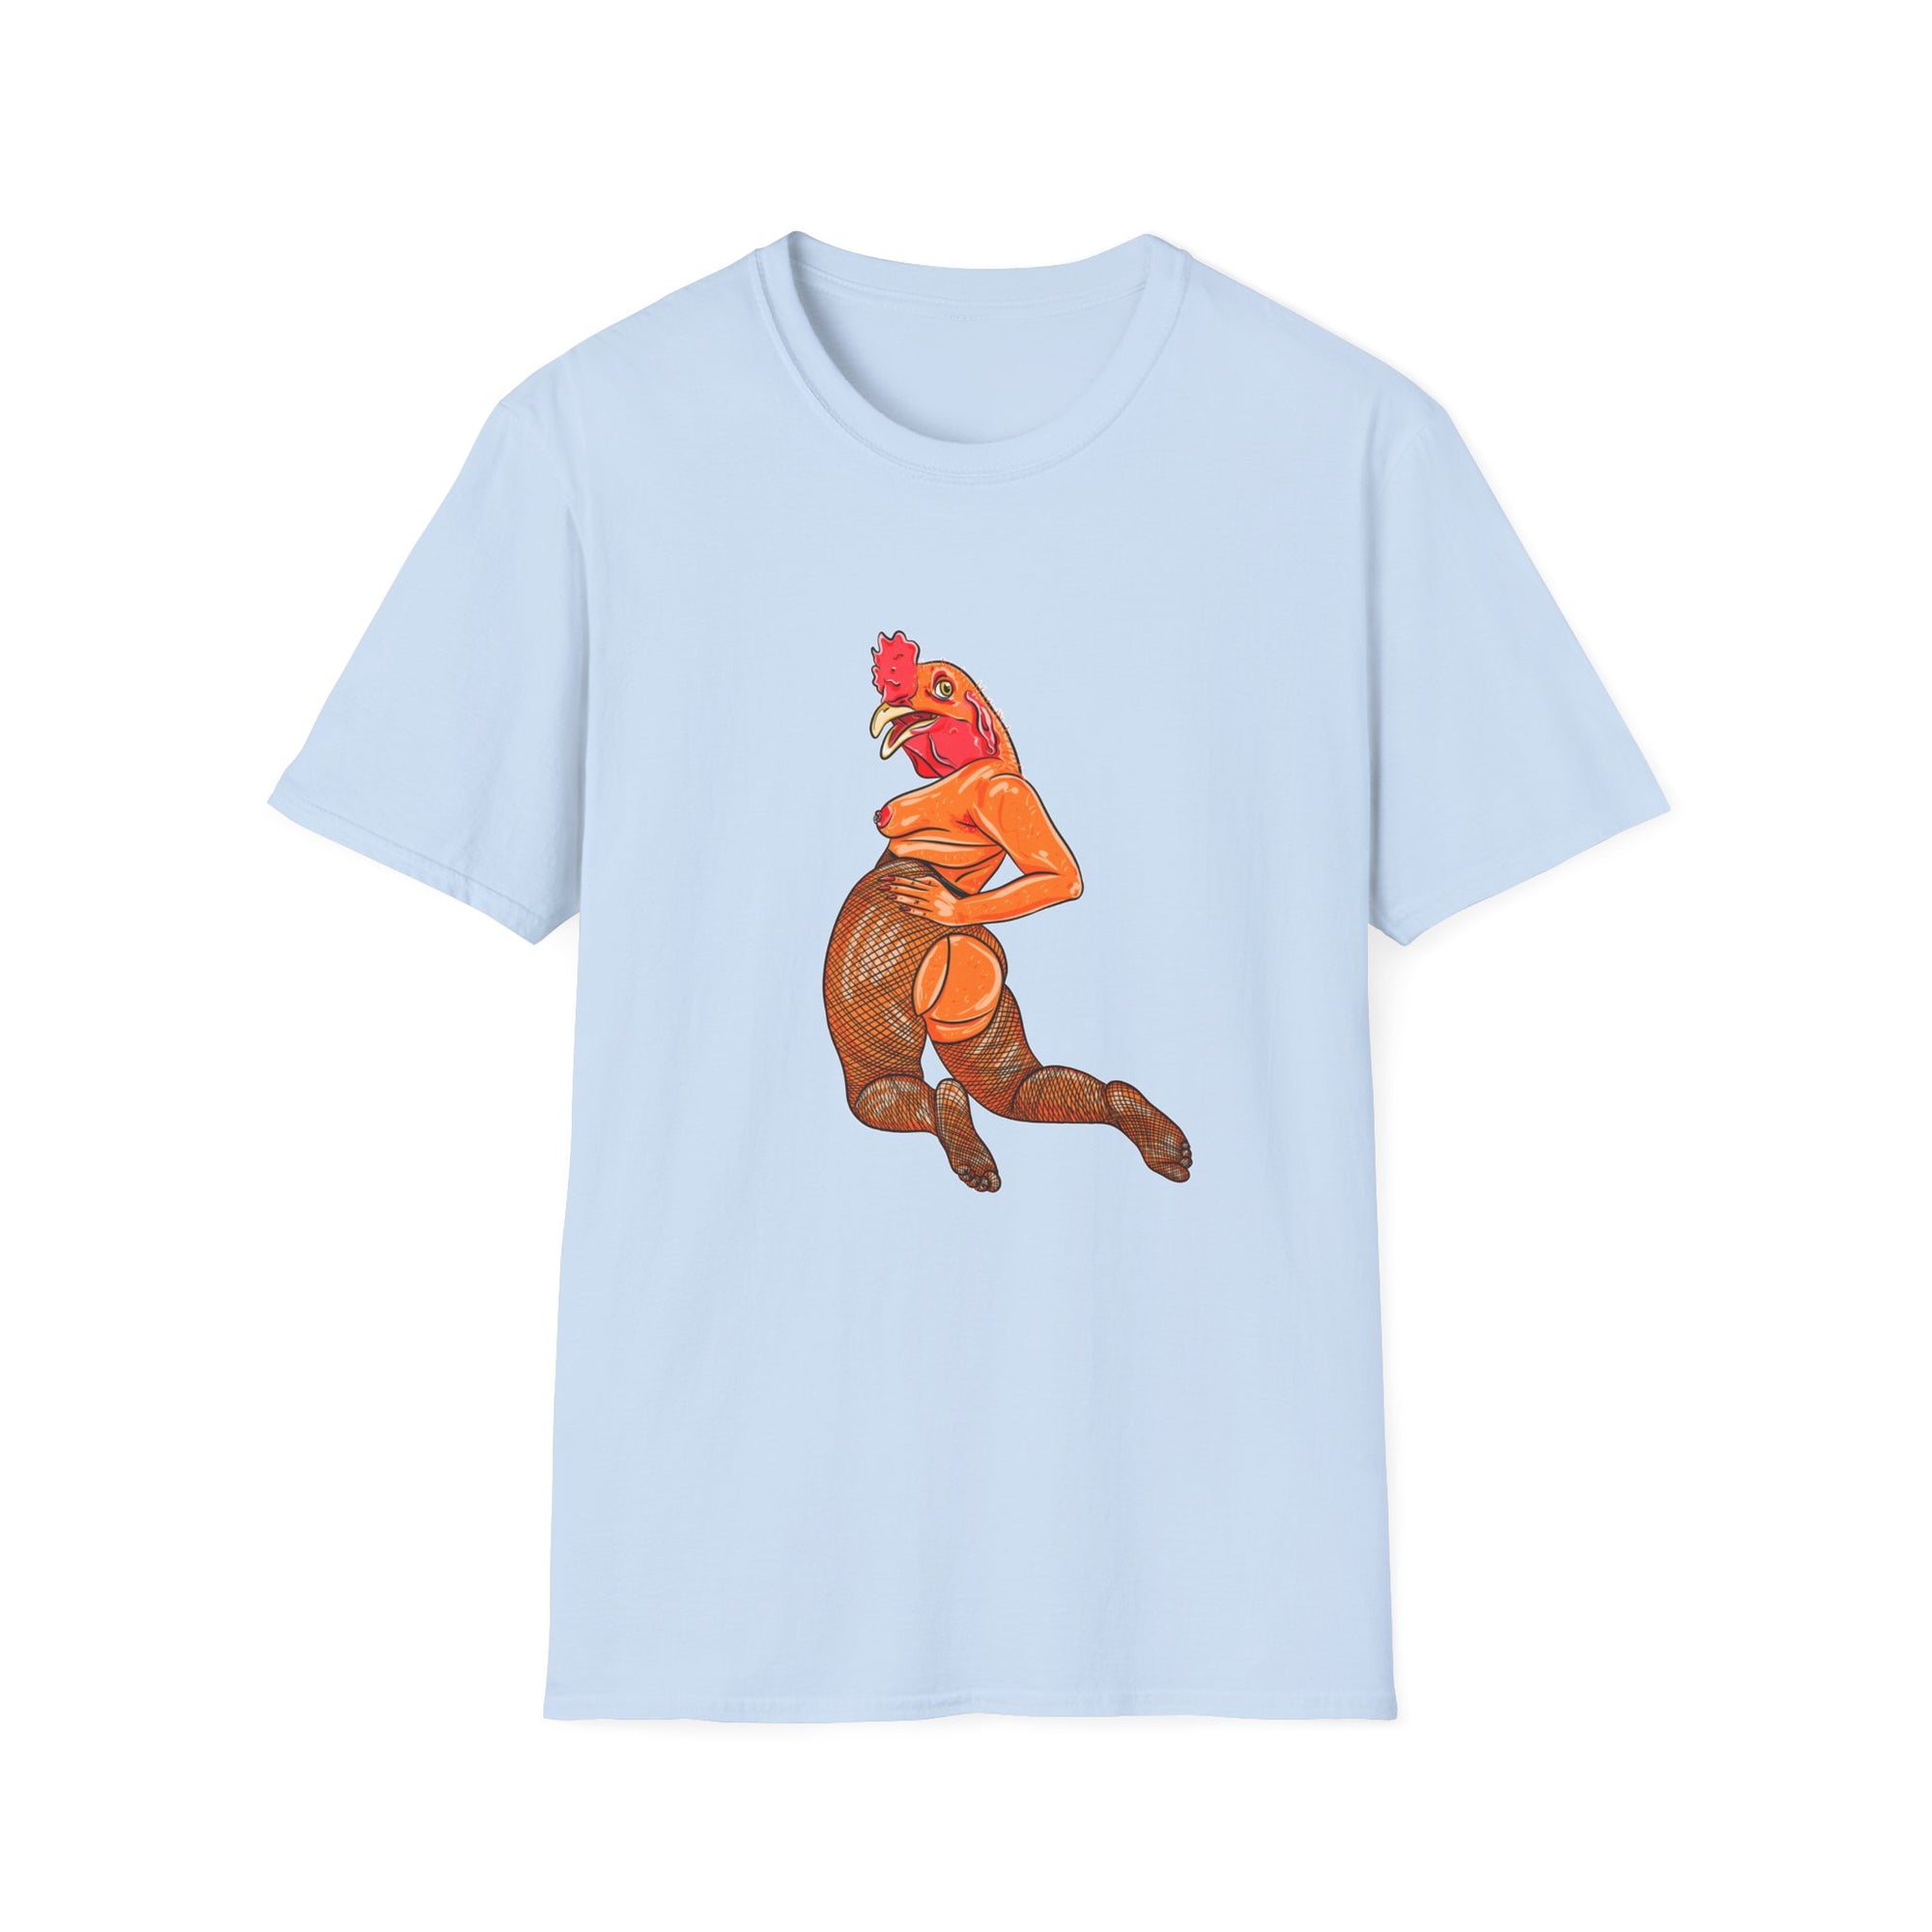 SHAKE YOUR TAIL FEATHER - Unisex Shirt